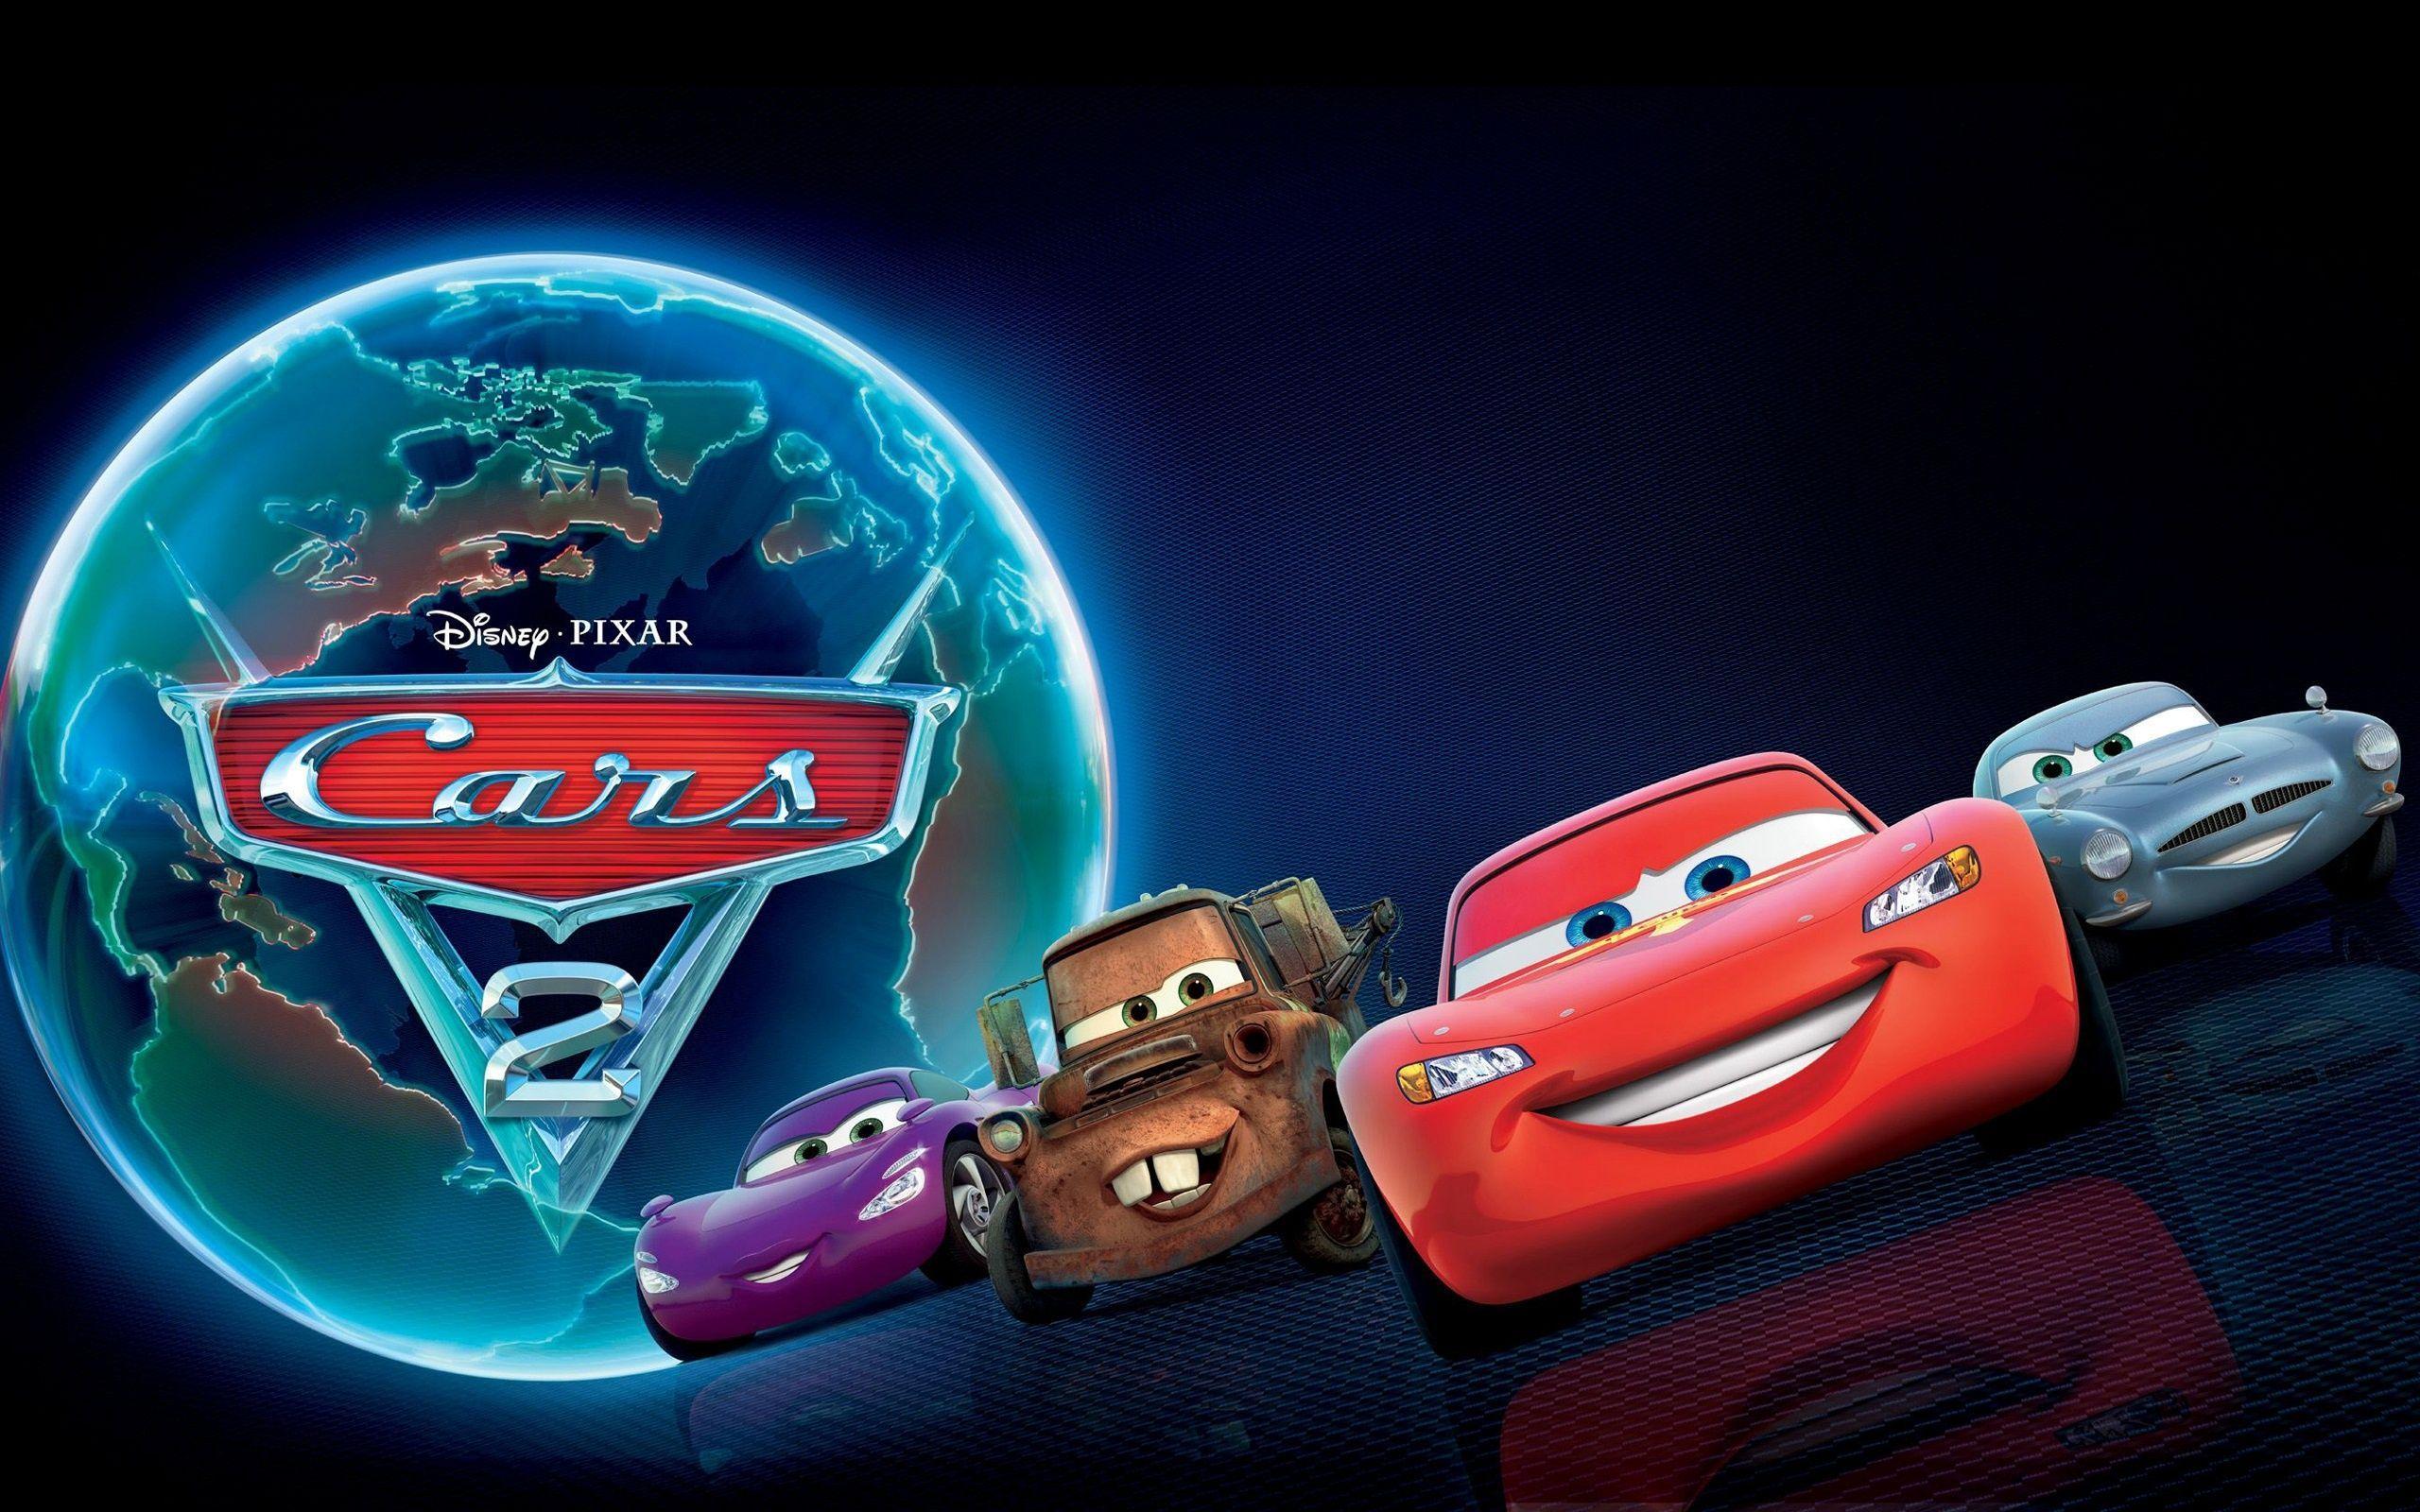 Holley Shiftwell in Cars 2 Movie Wallpaper in jpg format for free